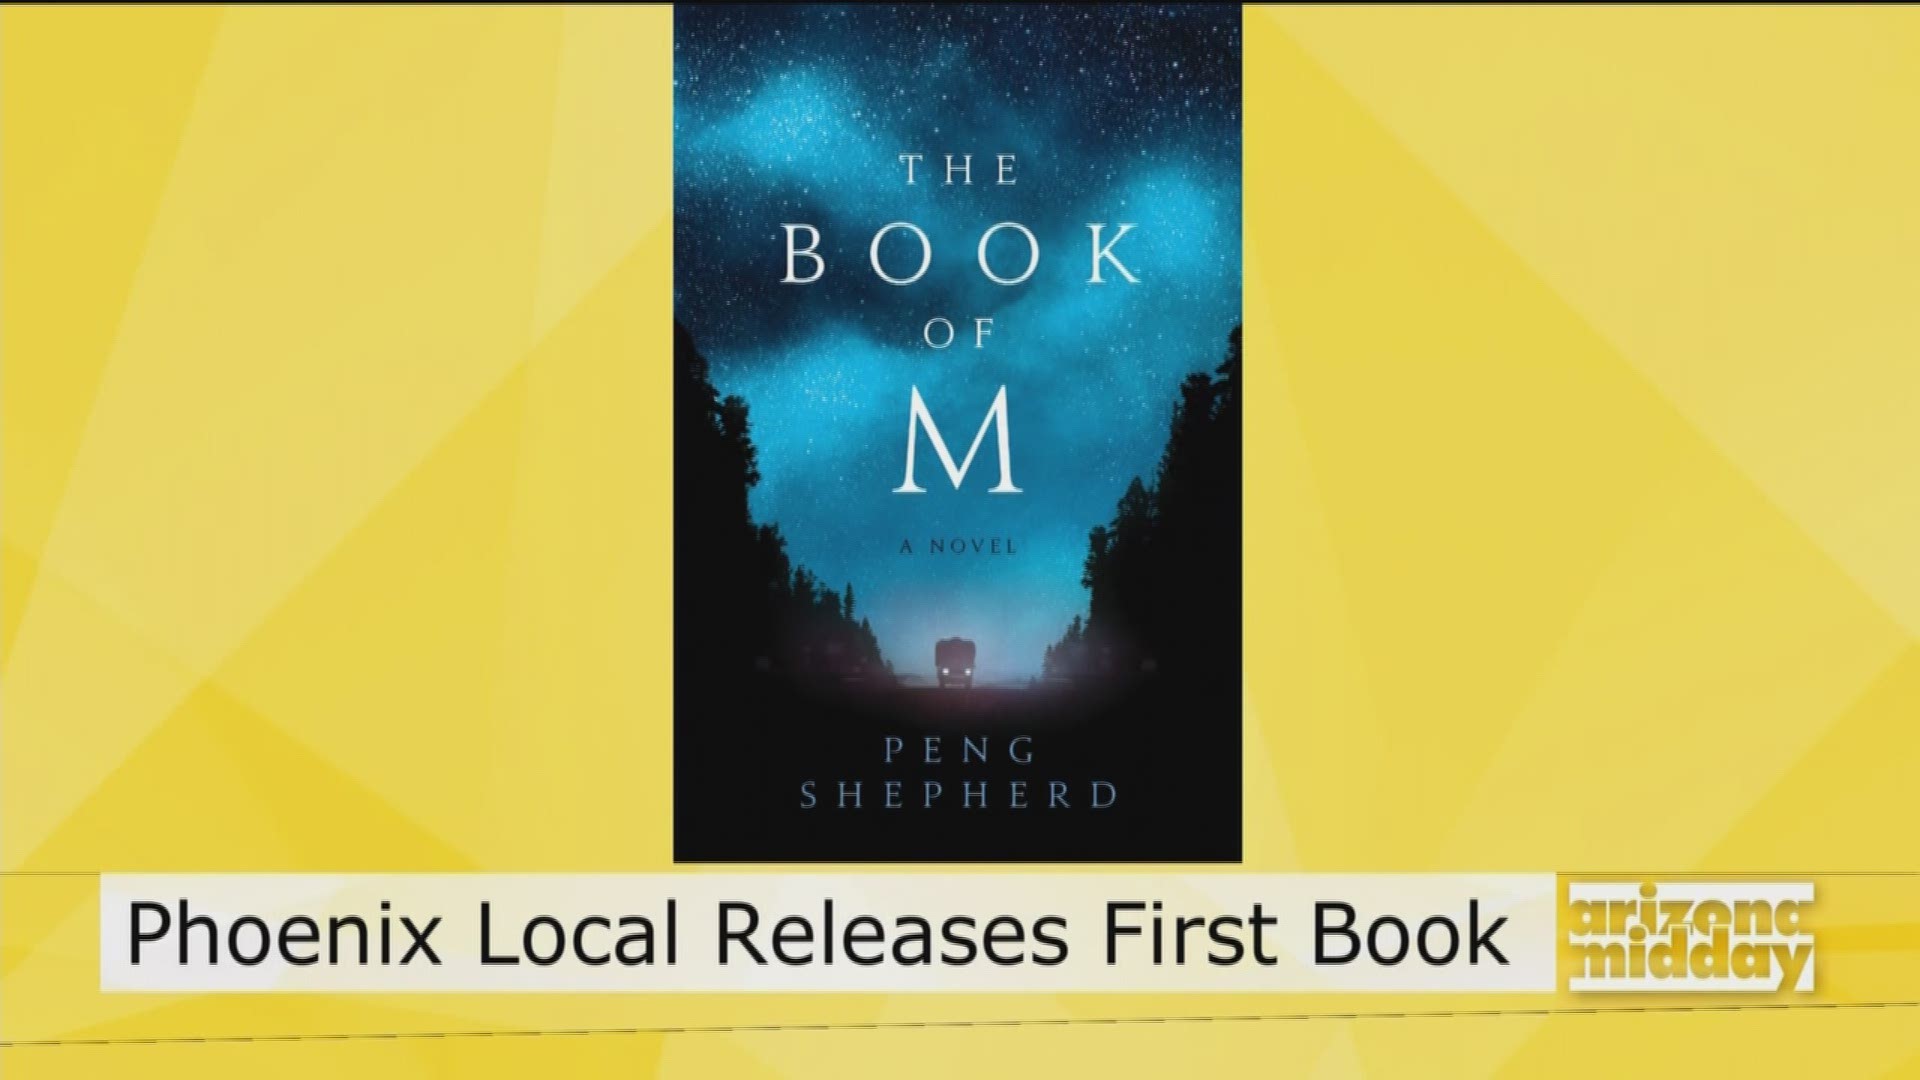 Peng Shepherd sat down with us to talk about her new book "The Book of M," which is projected to be a top 10 book of the summer!